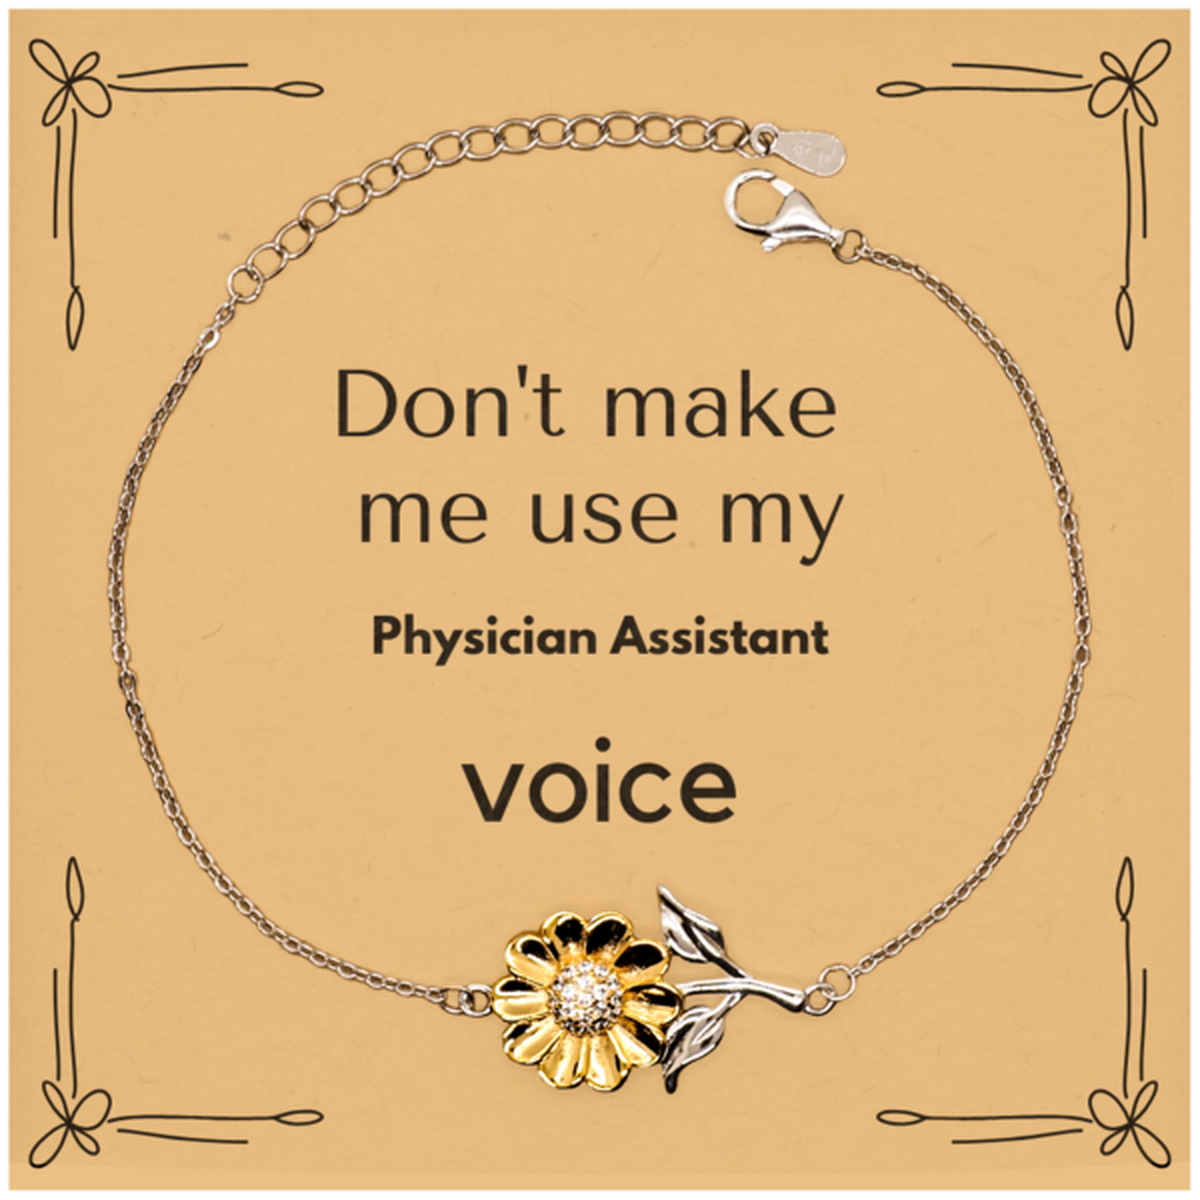 Don't make me use my Physician Assistant voice, Sarcasm Physician Assistant Card Gifts, Christmas Physician Assistant Sunflower Bracelet Birthday Unique Gifts For Physician Assistant Coworkers, Men, Women, Colleague, Friends